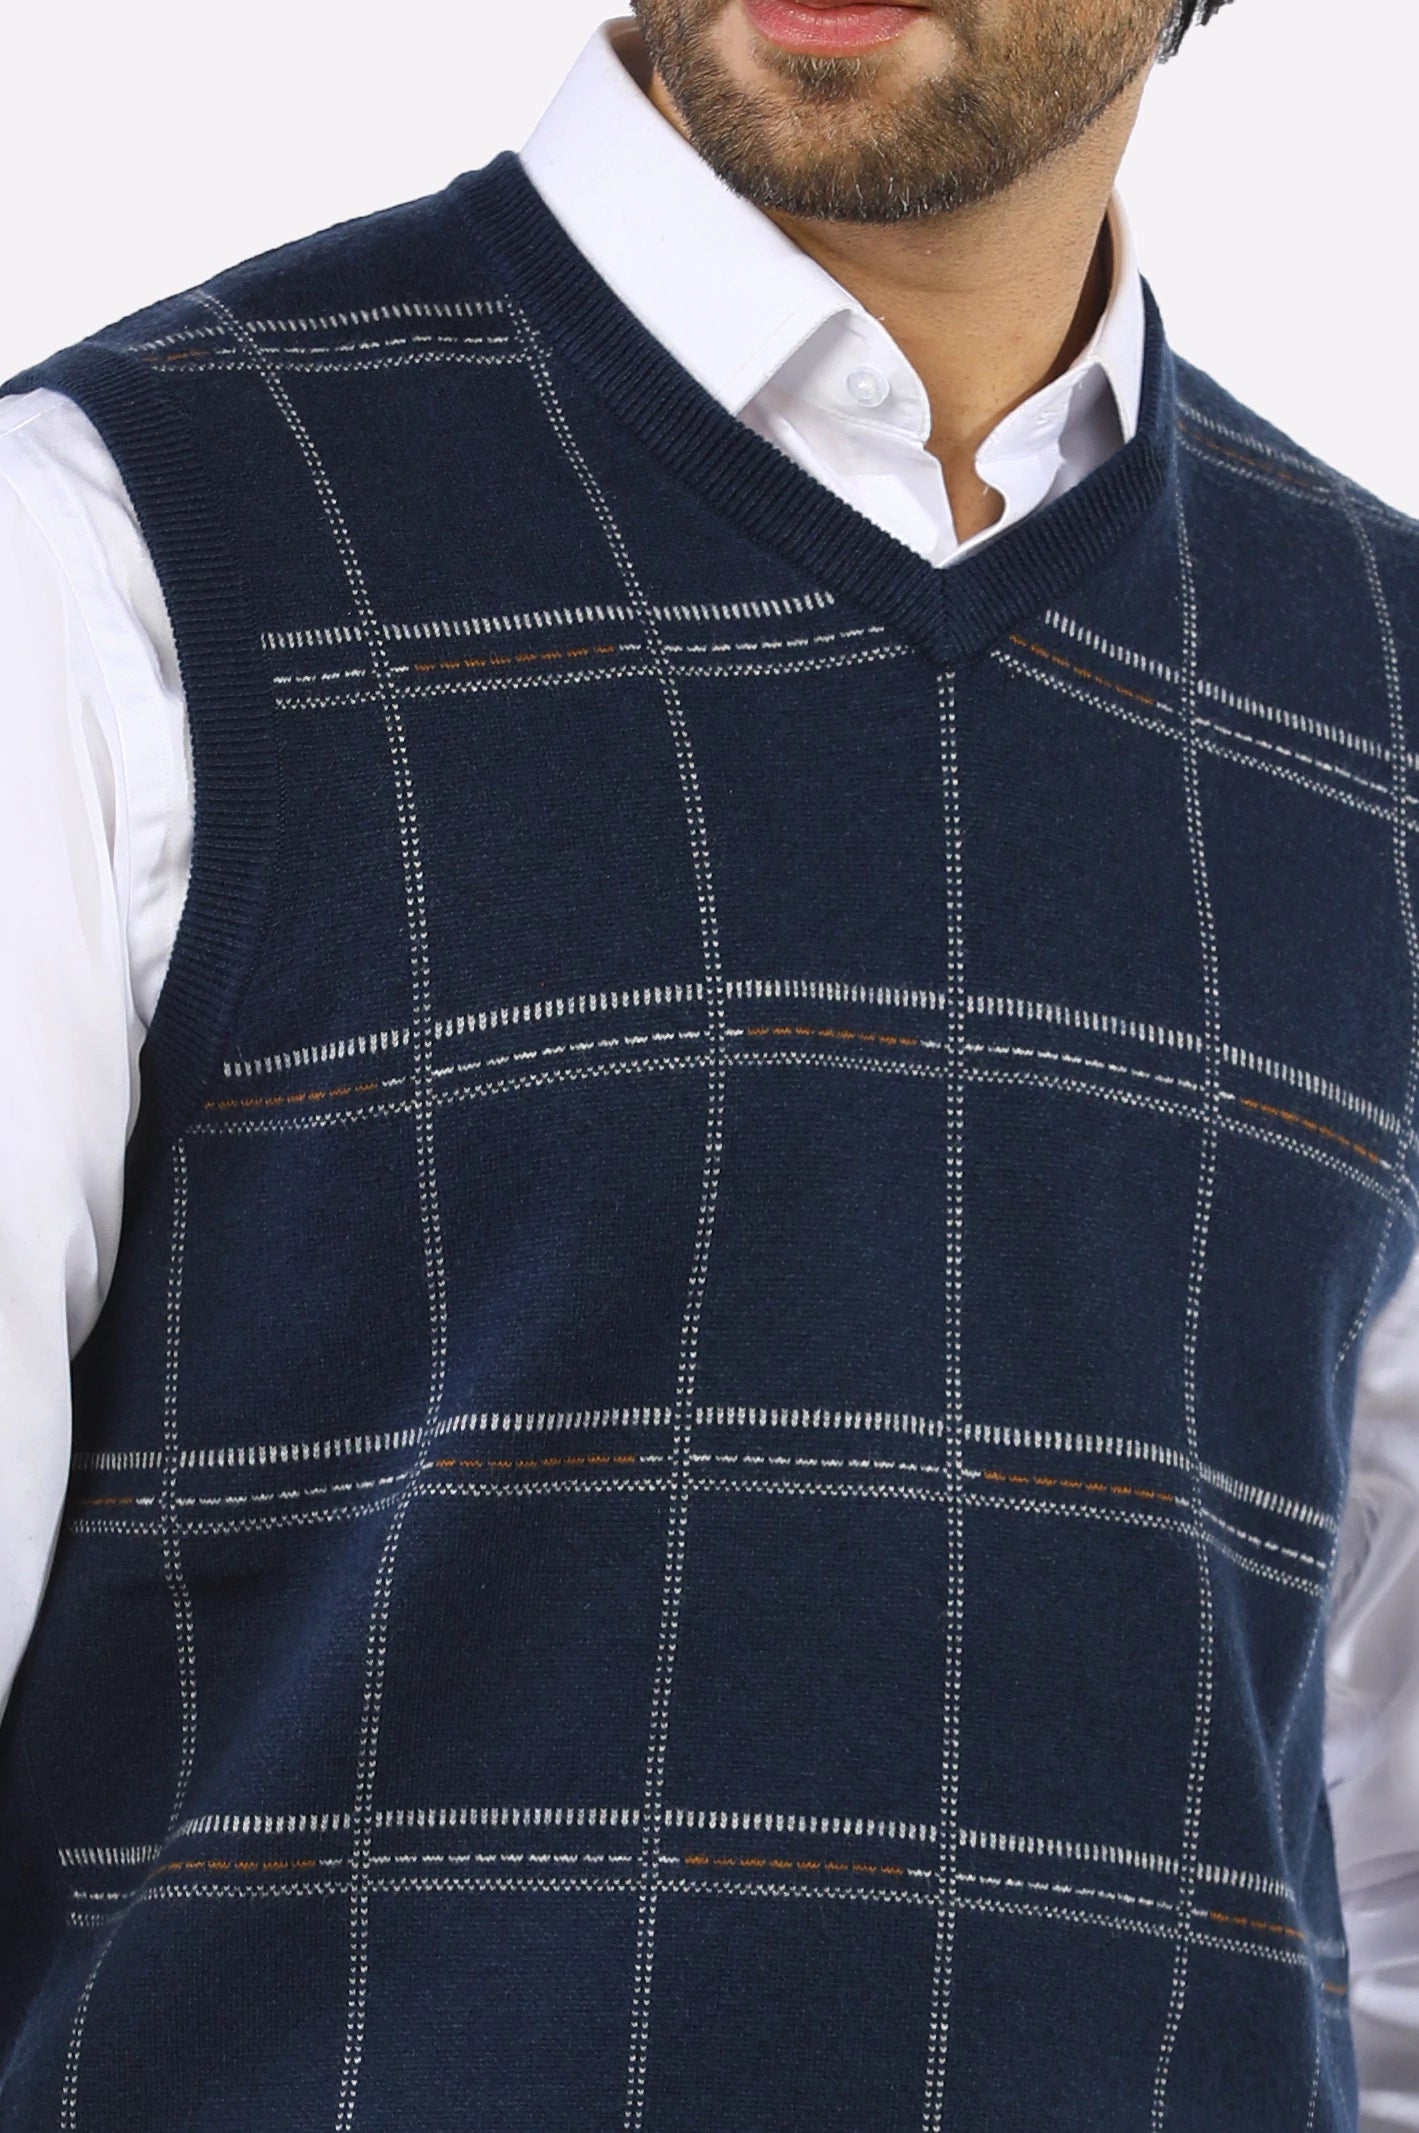 Dark Blue V-Neck Gents Sweater From Diners